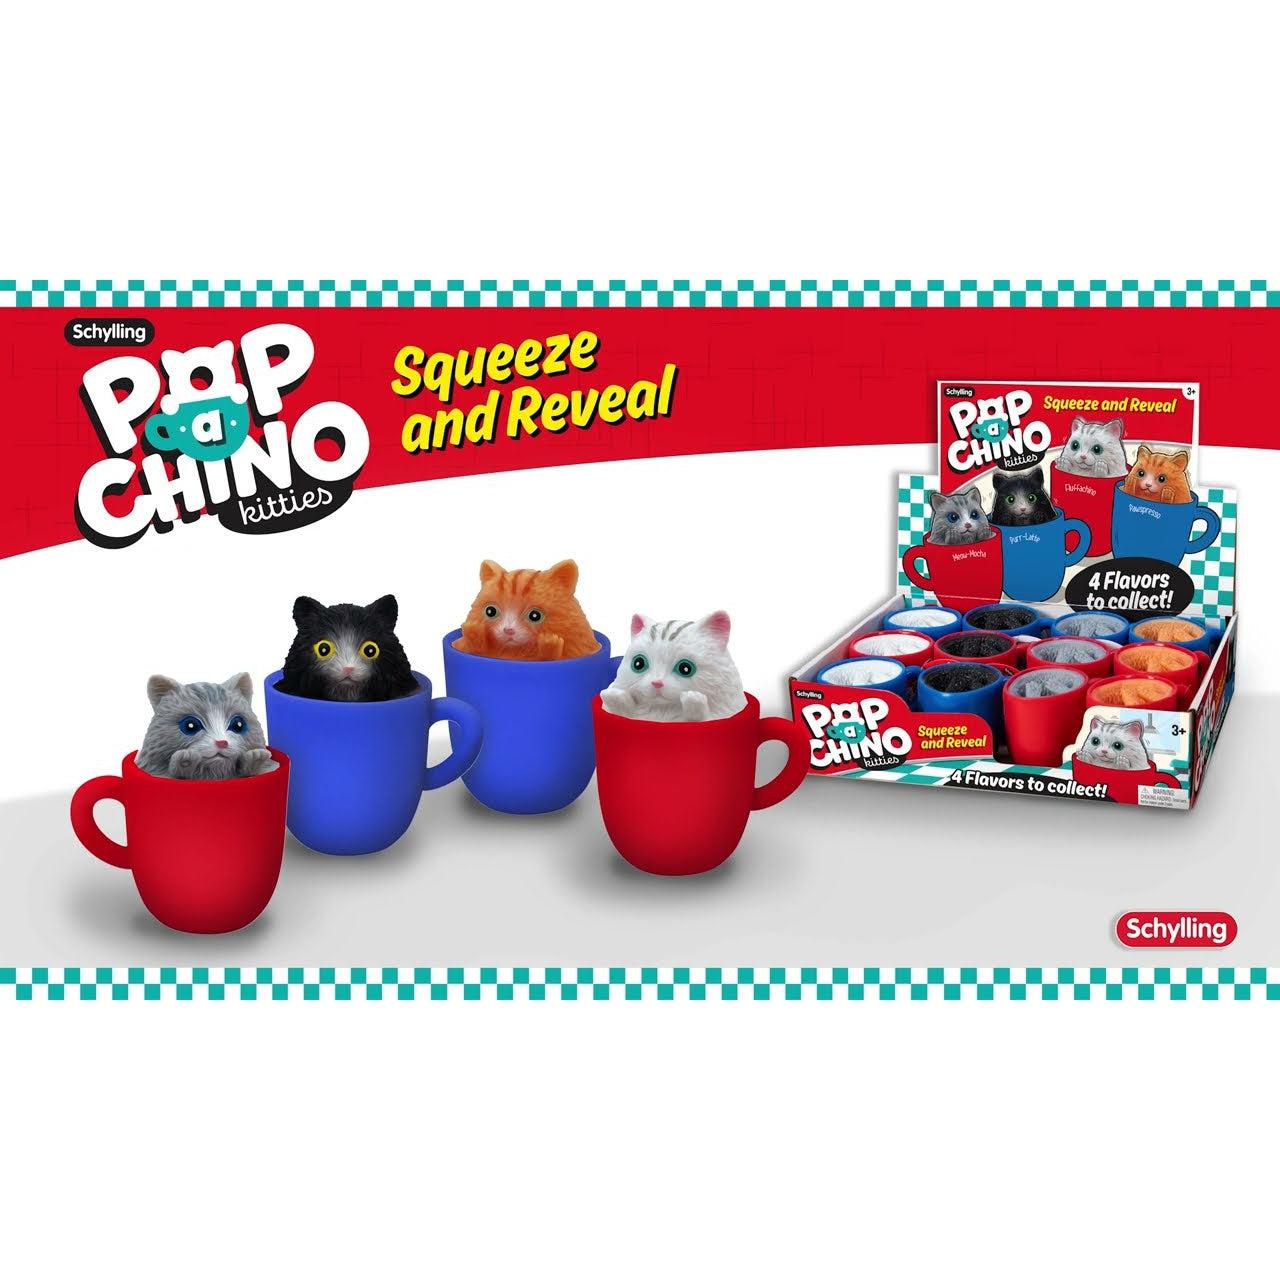 Schylling-Pop A Chino Kitties-PCK-Legacy Toys